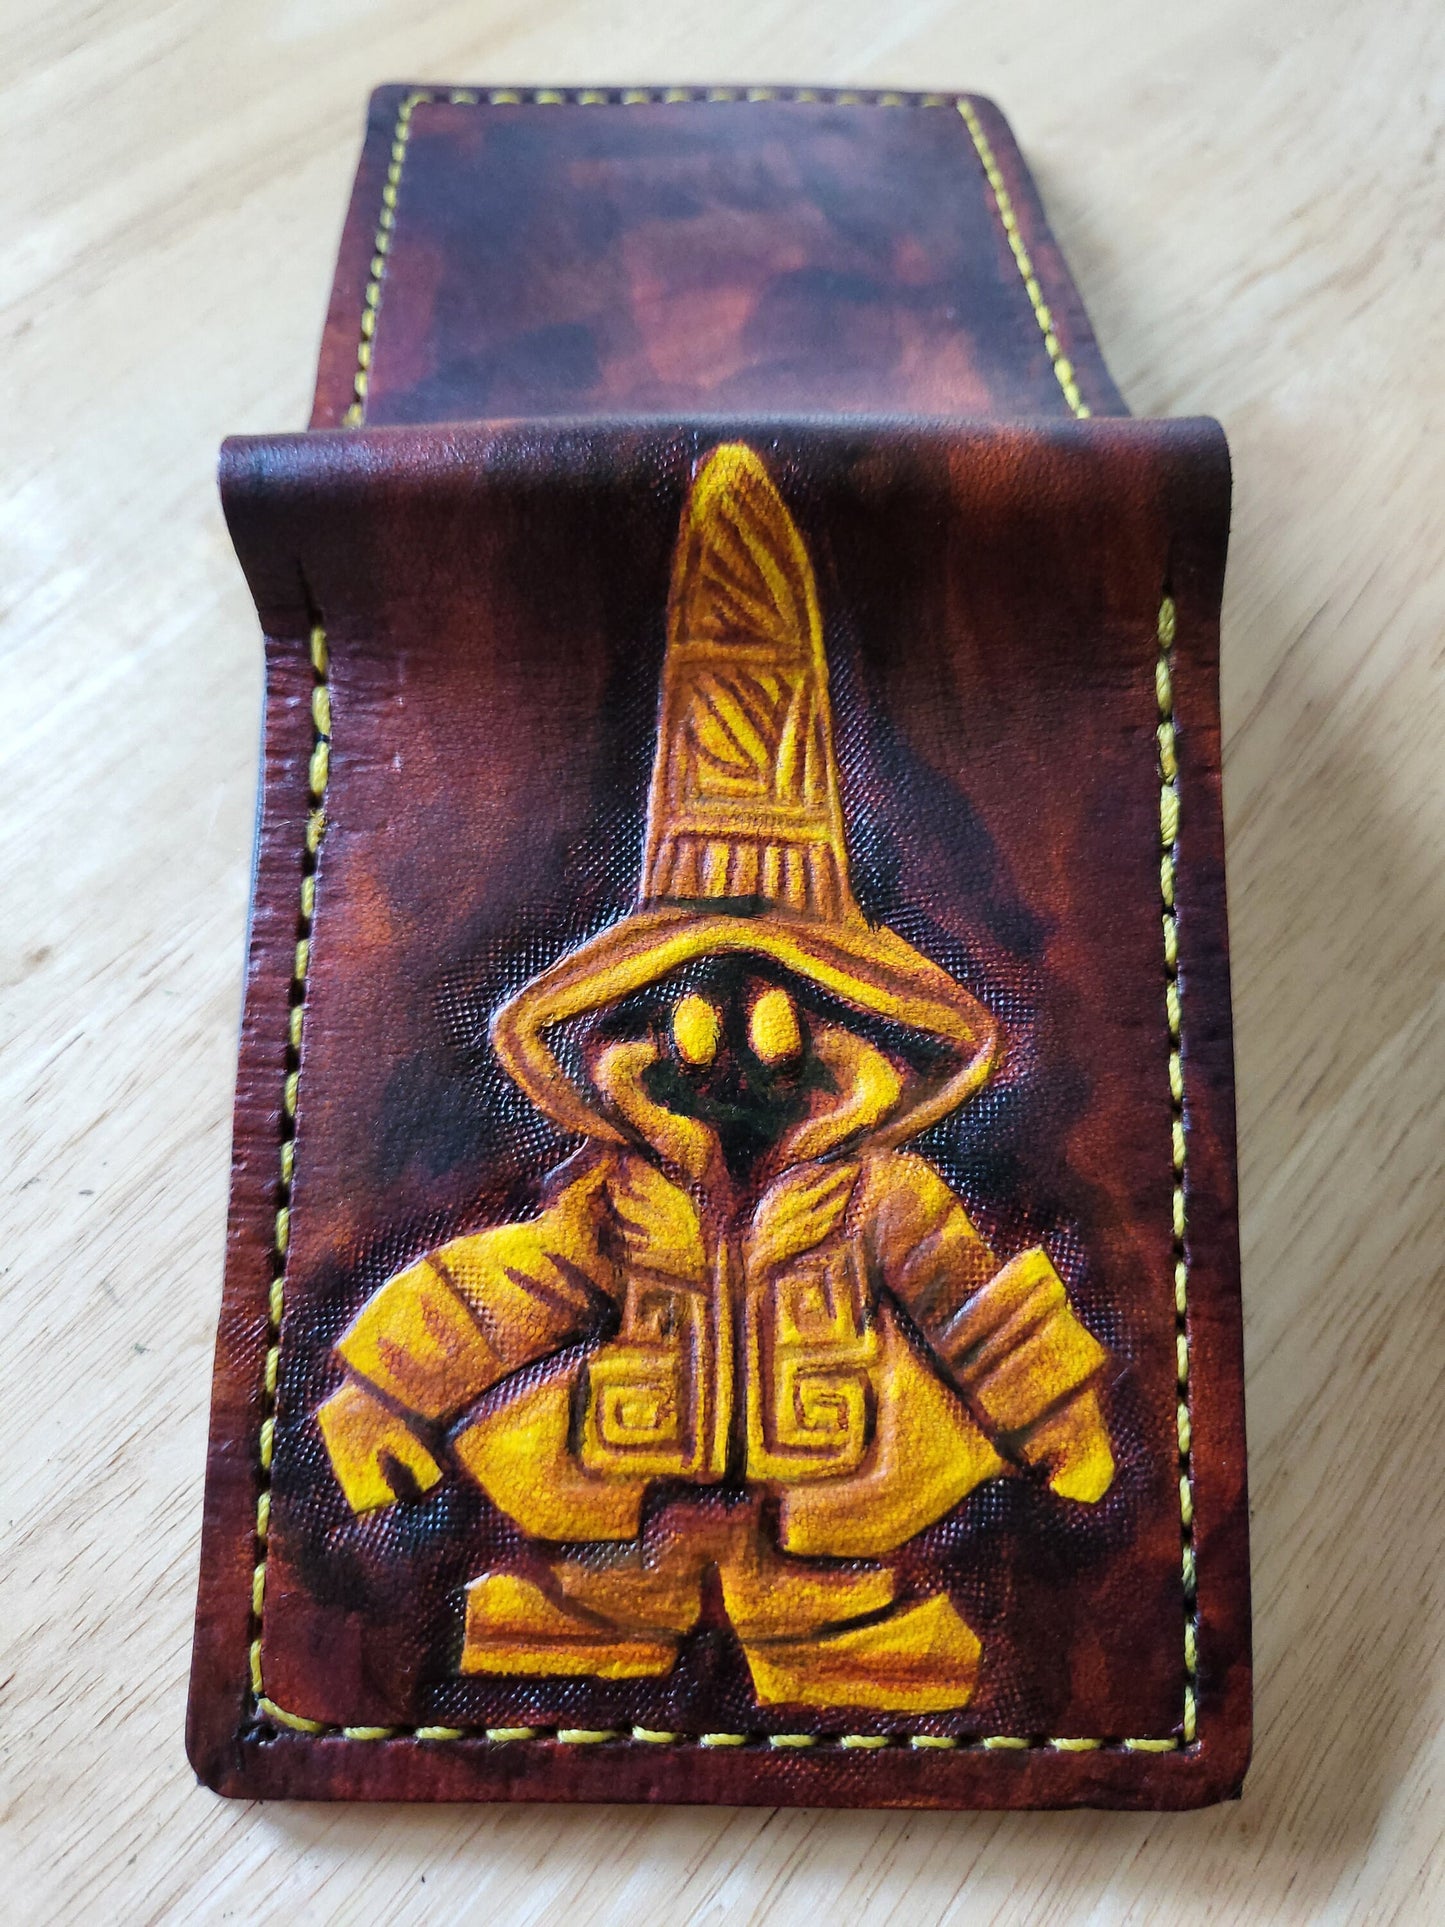 Vivi Ornitier - Leather Bifold Wallet - Handcrafted Final Fantasy inspired Wallet -